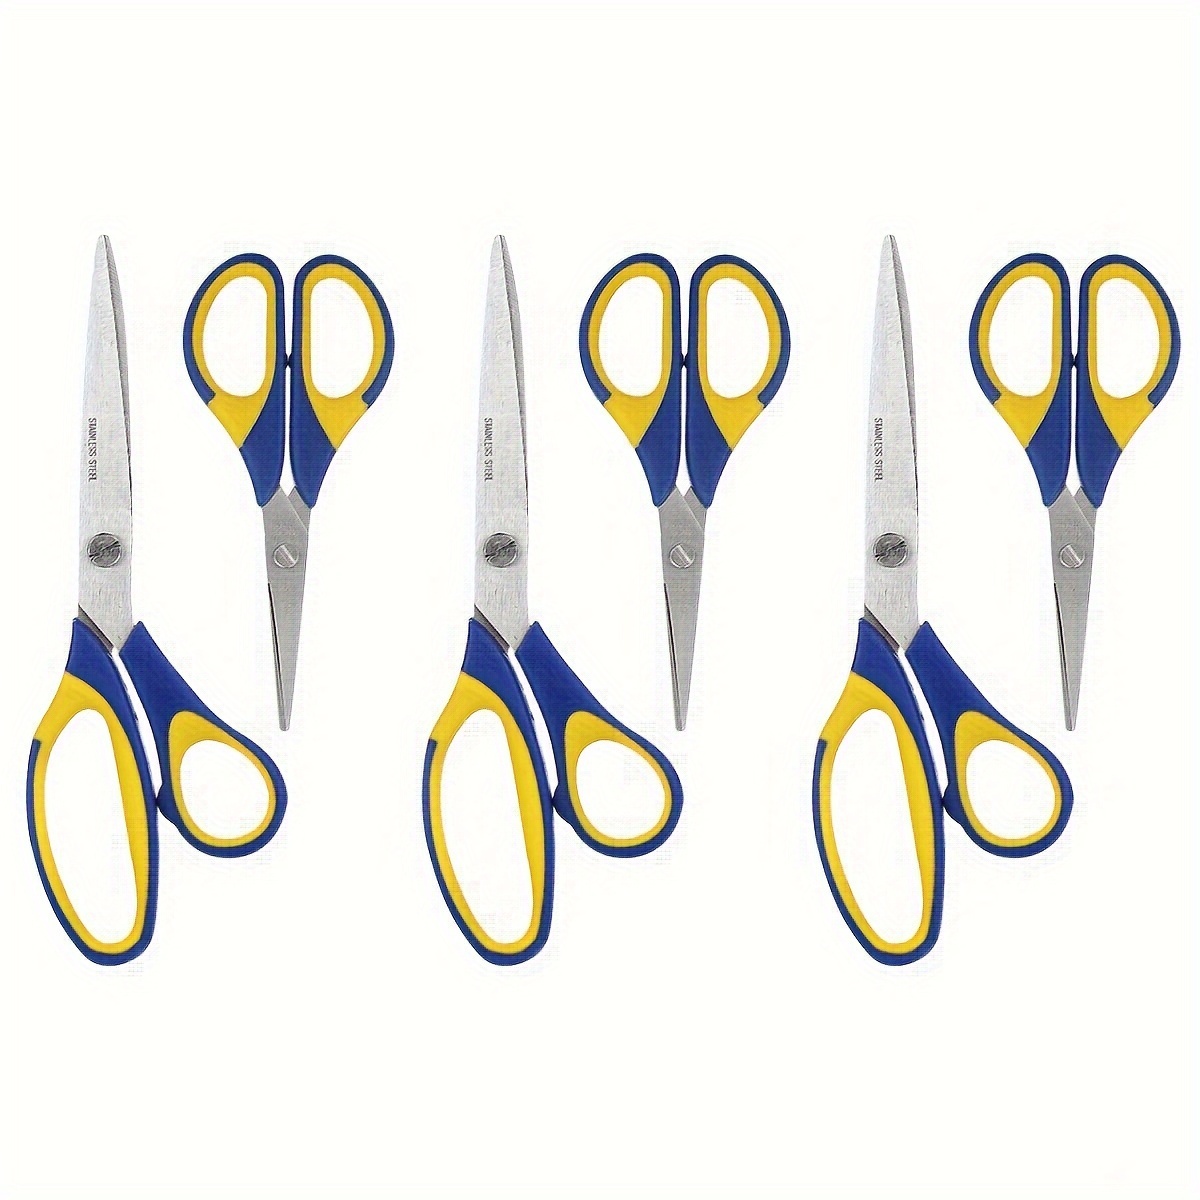 1set Professional Stainless Steel Comfort Grip, All-Purpose, Straight  Office Craft Scissors For Paper Cutting, Scrapbooking, Sewing, Crafting.  Set Of